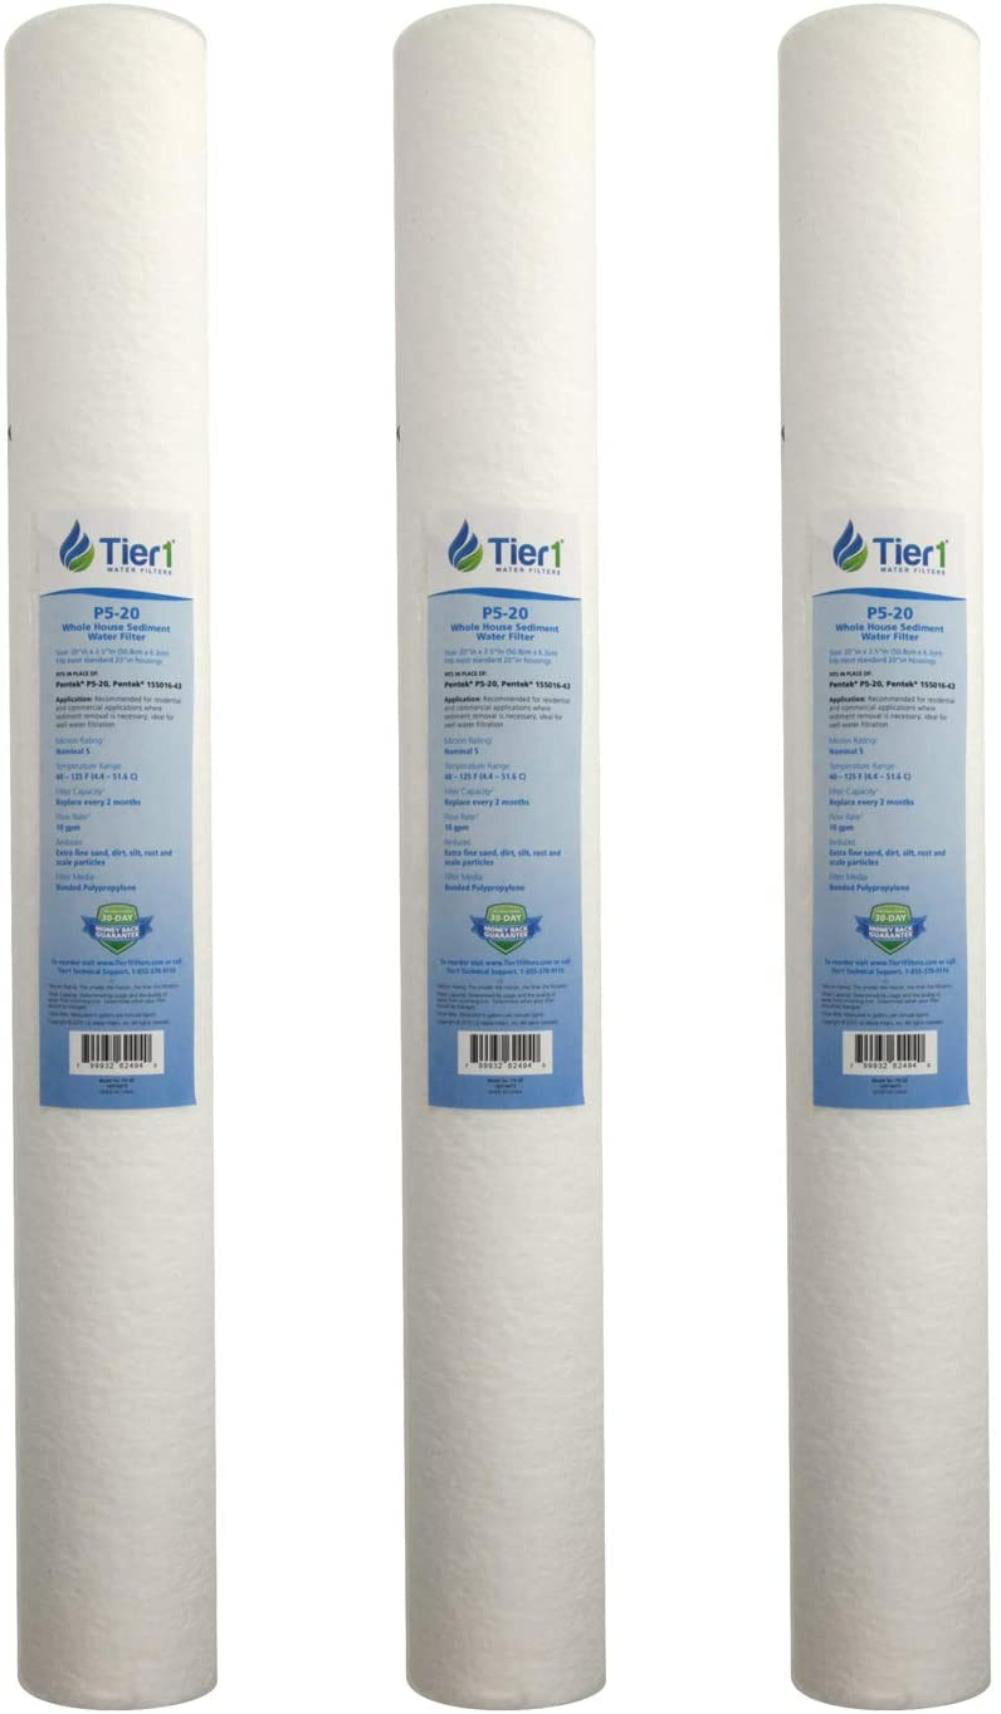 10 Micron 12-pack 20 X 2.5 Spun Wound Polypropylene Replacement Filter by Tier1 for sale online 